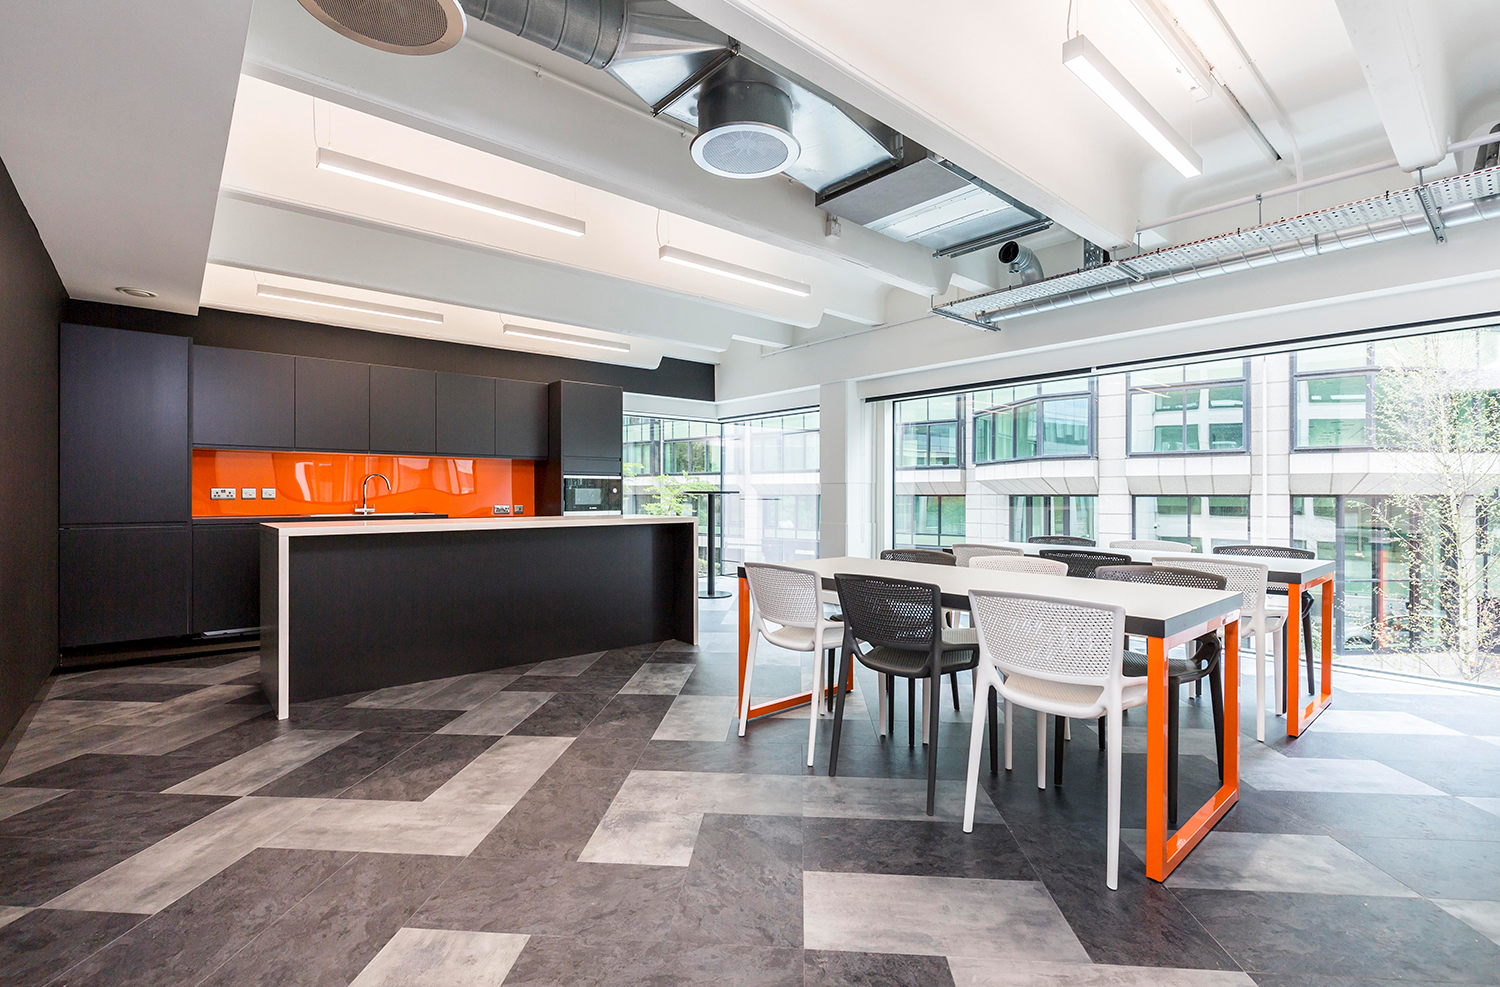 Company using orange and black its brand colours in breakout area.